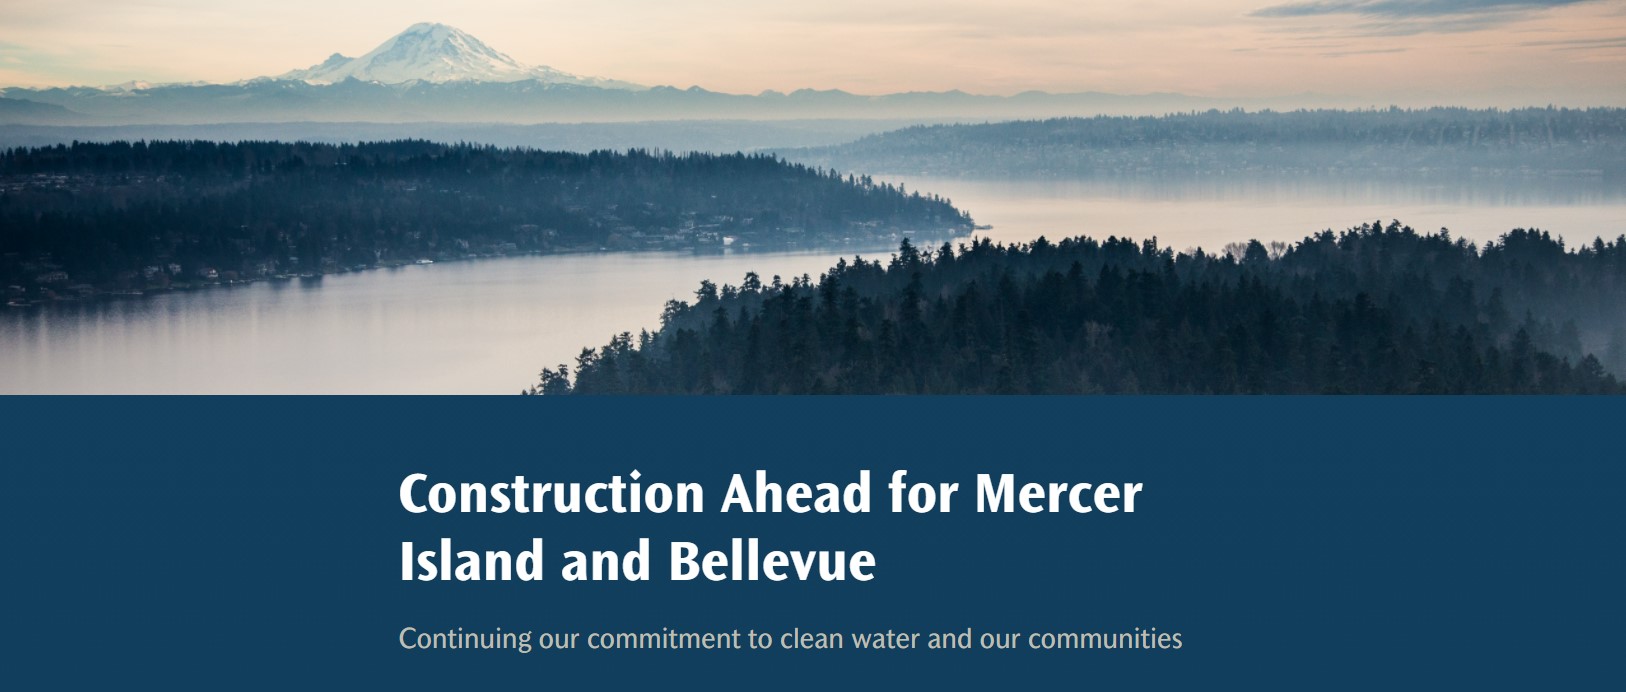 Banner with a photo of Lake WA and Mt Rainier and text that says construction in Mercer Island & Bellevue to start early 2022